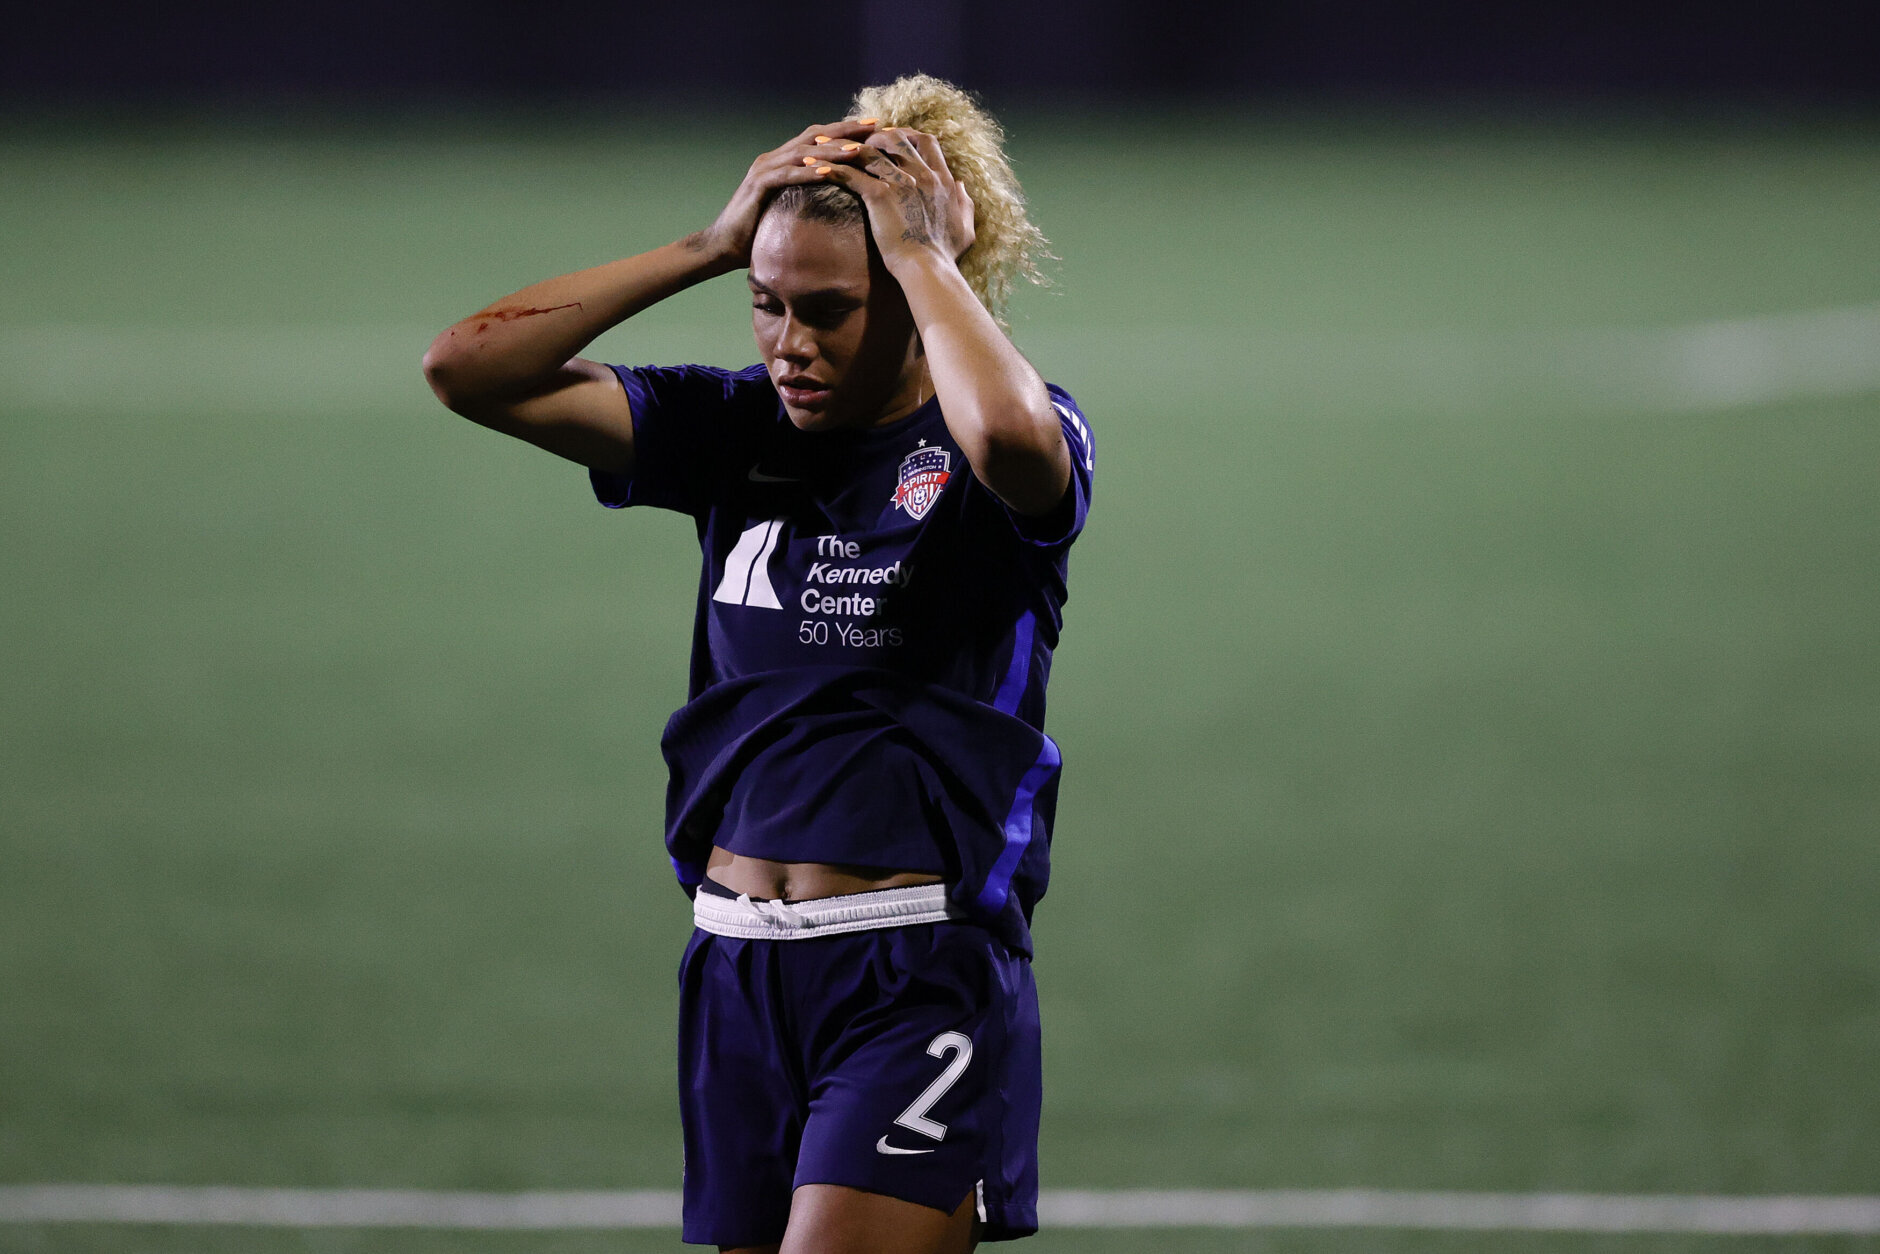 <h3>Championship drop-off for the Spirit but future set at Audi Field</h3>
<p>After winning its first NWSL Championship in club history in 2021, the Washington Spirit looked poised to be title contenders again in 2022. With Michele Kang becoming <a href="https://wtop.com/soccer/2022/03/michele-kang-becomes-majority-owner-of-washington-spirit/">the new controlling owner of the team</a> and much of its championship roster returning, the Spirit started strong, reaching the finals of the Challenge Cup during the preseason.</p>
<p>However, in regular season play, everything changed. After <a href="https://wtop.com/gallery/media-galleries/spirit-celebrate-championship-open-season-with-win-over-ol-reign/">winning its home opener</a>, the Spirit went on a 16-match winless streak, with injuries, losing players to international duty, and bad luck playing a factor.</p>
<p>Then with six games remaining, head coach Kris Ward was fired after an <a href="https://wtop.com/local-sports/2022/08/washington-spirit-incident-with-player-forces-another-coaching-change/">altercation with an unnamed player</a>. The Spirit ended the 2022 season with three regular-season victories as it watched <a href="https://wtop.com/sports/2022/10/mvp-smith-scores-and-thorns-beat-current-2-0-for-nwsl-title/">Portland win the NWSL title</a> in its city. Washington will also enter the new year without defender and fan-favorite Kelley O’Hara, <a href="https://wtop.com/local-sports/2022/11/kelley-ohara-leaves-spirit-signs-with-gotham-as-a-free-agent/">who left in free agency</a>.</p>
<p>One positive for Spirit fans heading to 2023 is the Spirit moving to play at <a href="https://wtop.com/local-sports/2022/12/washington-spirit-to-play-full-time-at-audi-field-starting-2023/">Audi Field in Southwest D.C., full time</a>. With a permanent home, a <a href="https://wtop.com/local-sports/2022/11/parsons-returns-to-dc-as-spirits-new-head-coach/">new head coach</a> and Kang’s influence, the Spirit hopes the new year will bring much more success and a return to championship glory.</p>
<p><em>— José Umaña</em></p>
